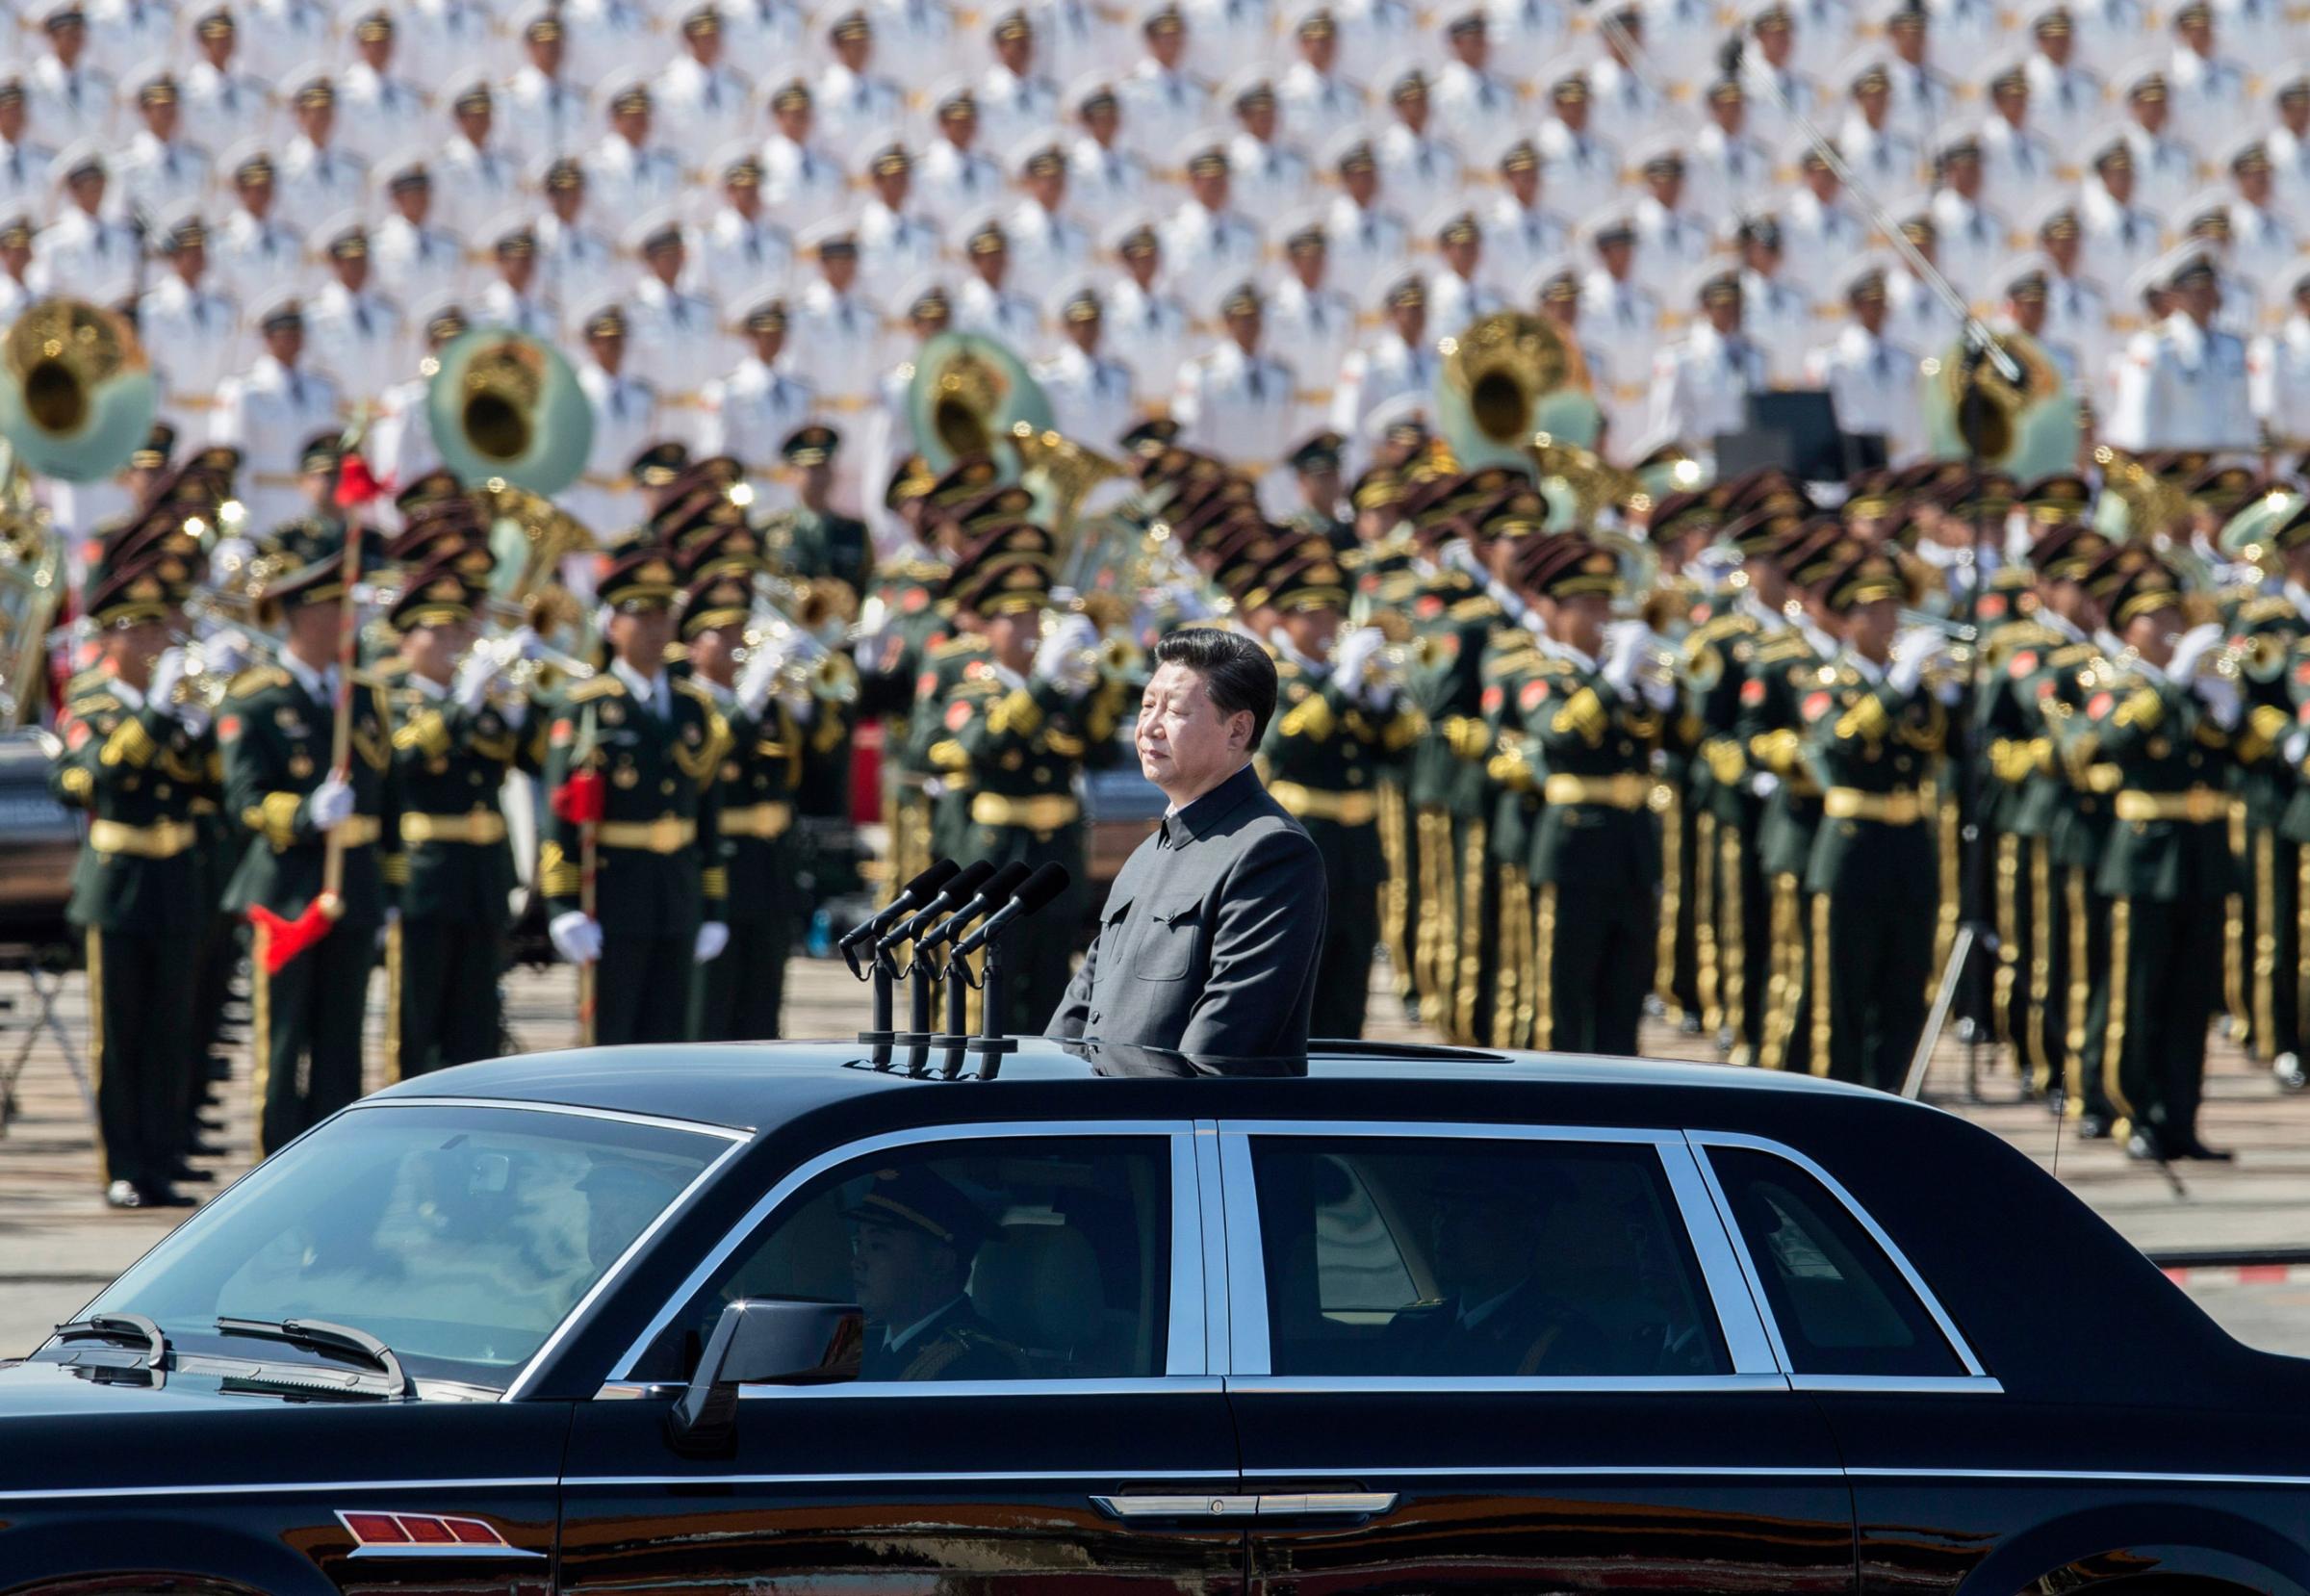 BEIJING, CHINA - SEPTEMBER 03: Chinese president and leader of the Communist Party Xi Jinping rides in an open top car in front of Tiananmen Square and the Forbidden City during a military parade on September 3, 2015 in Beijing, China. China is marking the 70th anniversary of the end of World War II and its role in defeating Japan with a new national holiday and a military parade in Beijing. (Photo by Kevin Frayer/Getty Images)